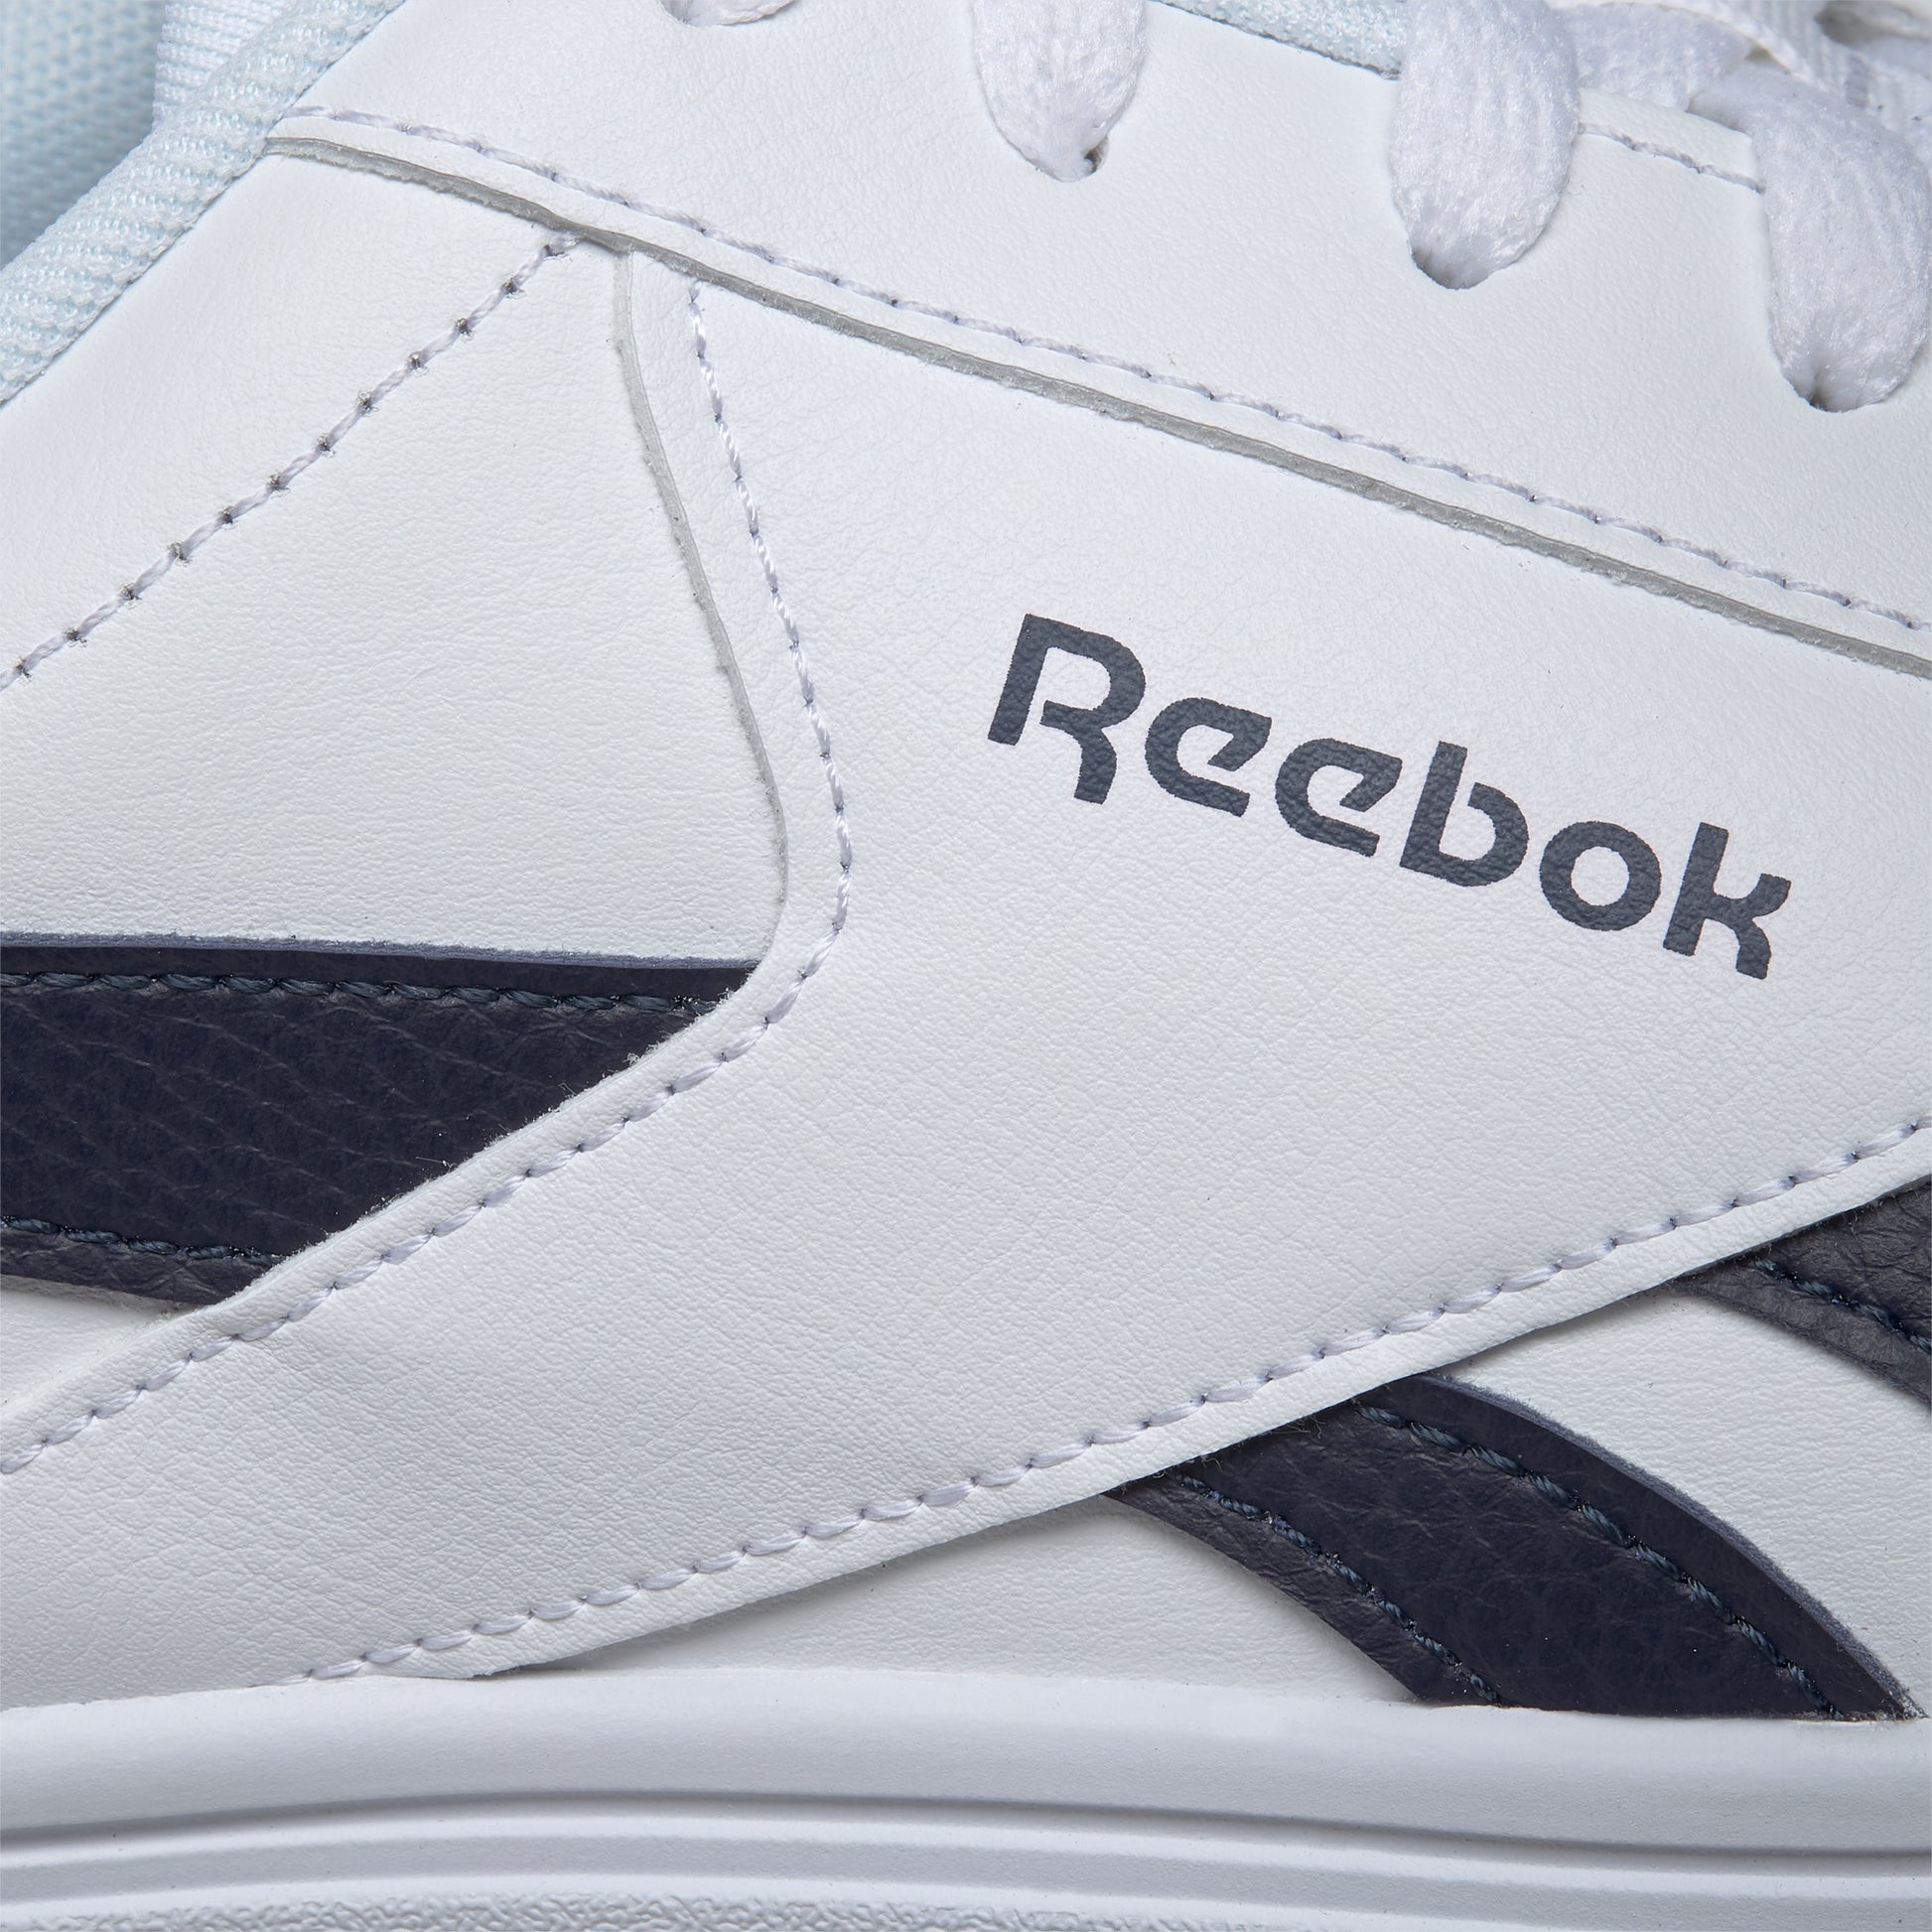 Reebok Royal Complete 3.0 Low Shoes in White / Collegiate Navy